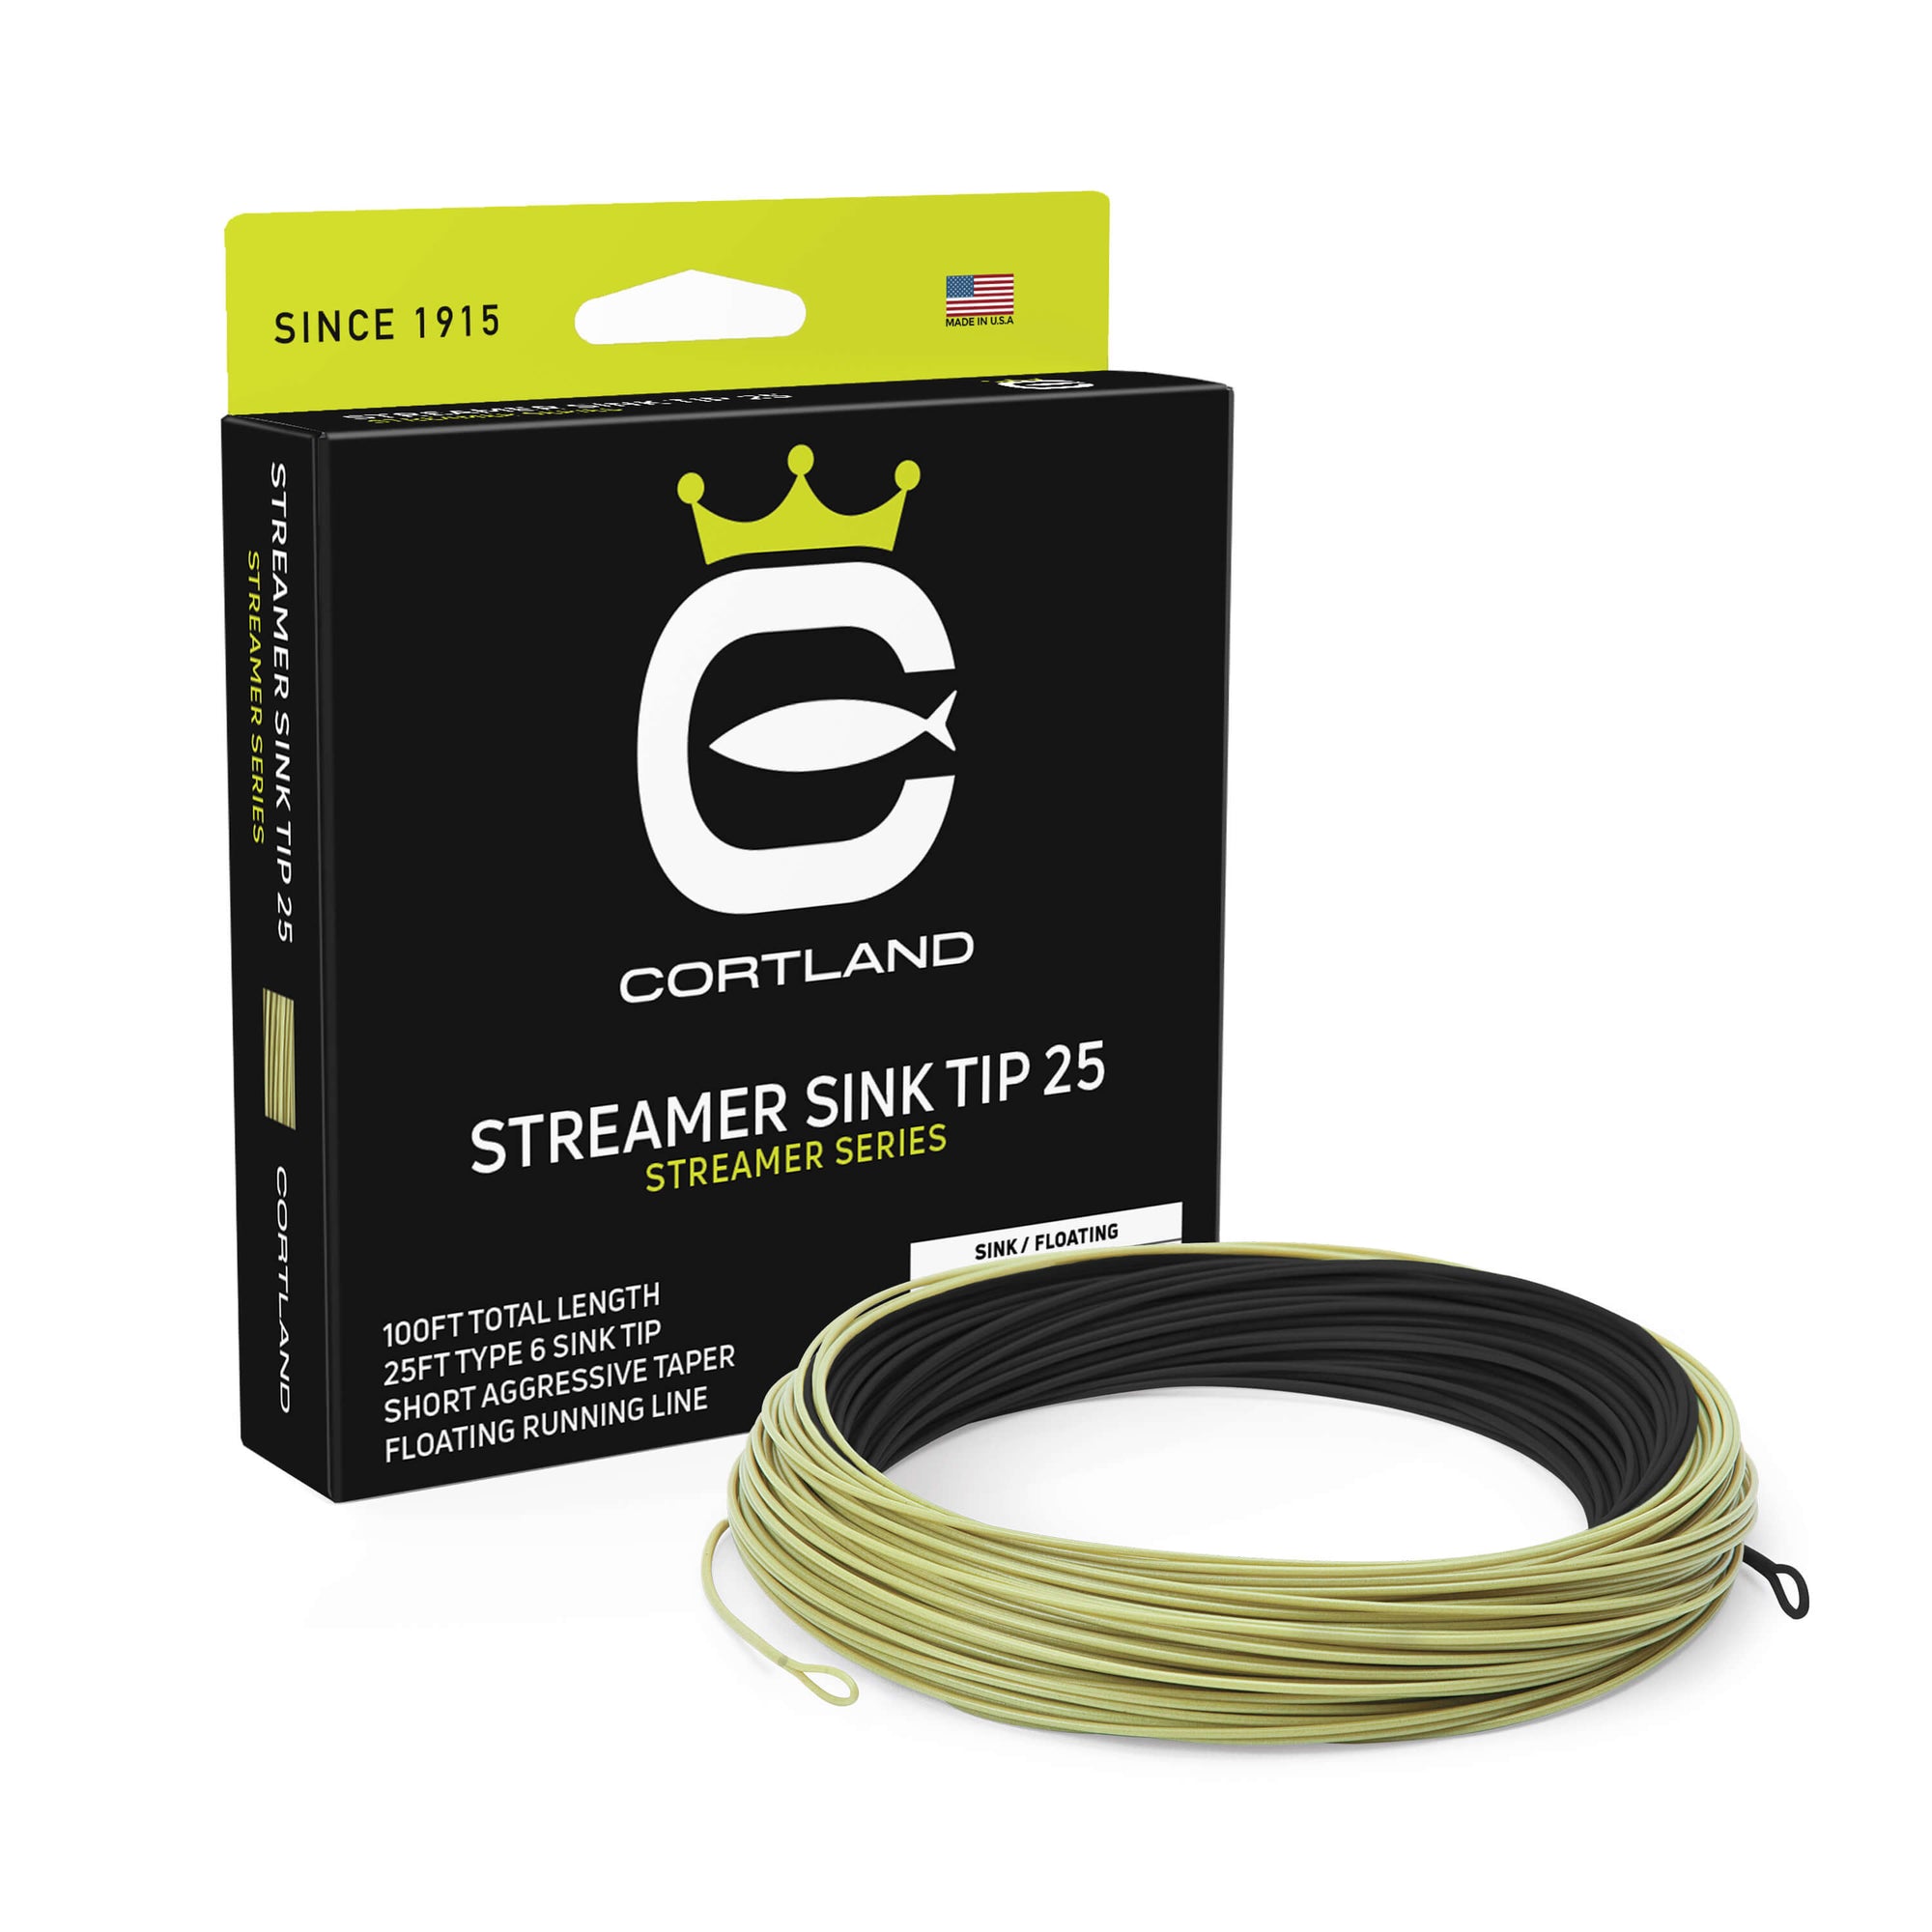 Streamer Sink Tip 25 Fly Line Box and Coil. The coil is black and sage. The box has the Cortland Logo and is black and neon green at the top.